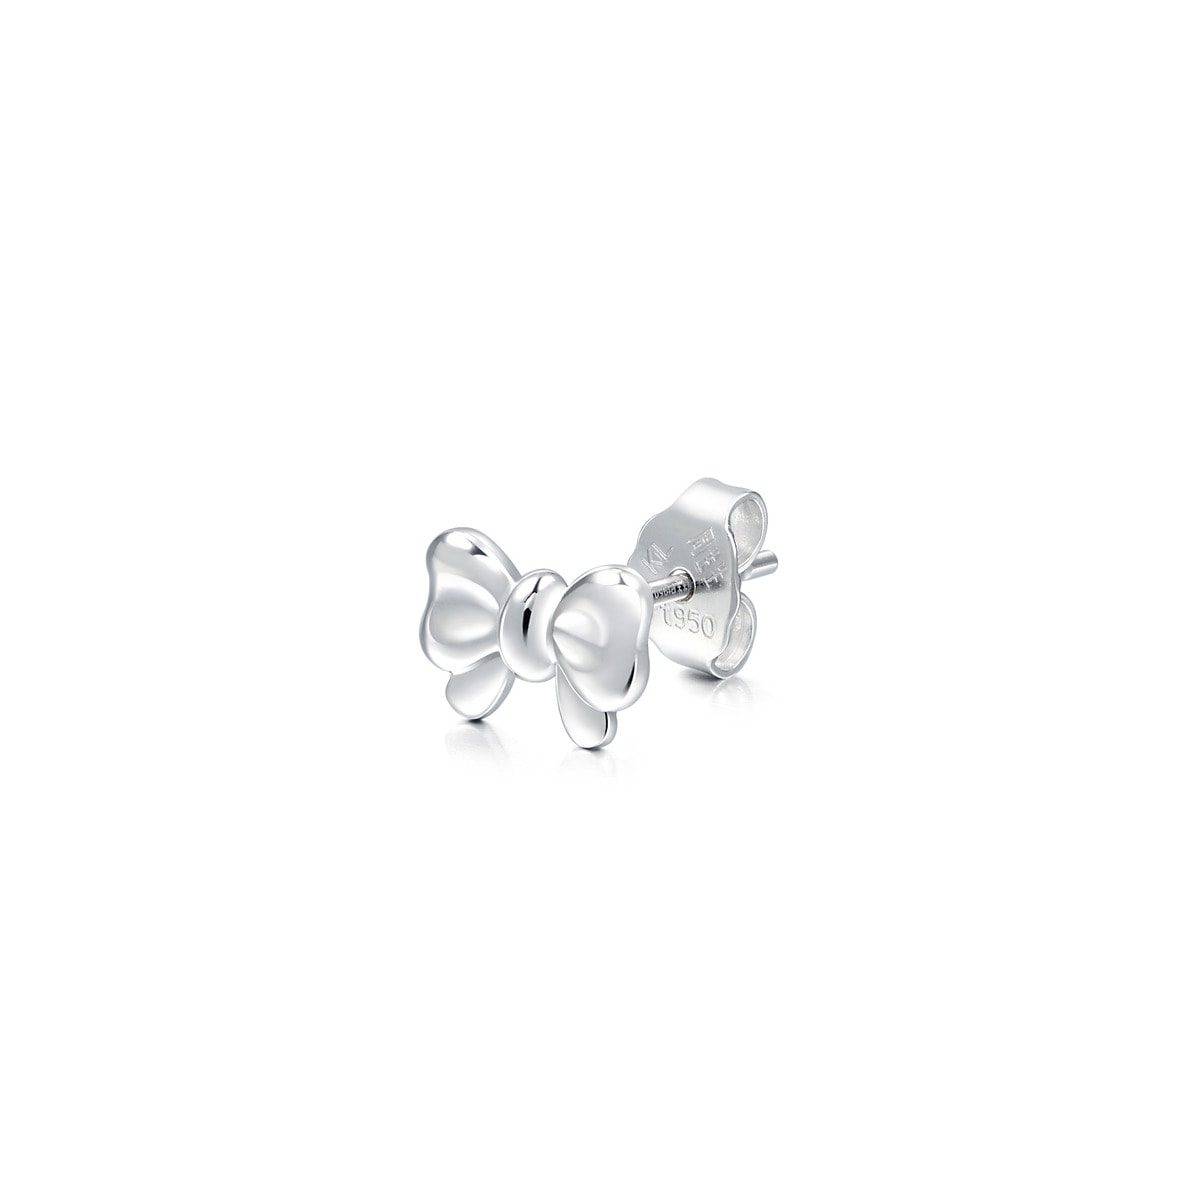 Let's Play 950 Platinum Earring - 89816E | Chow Sang Sang Jewellery